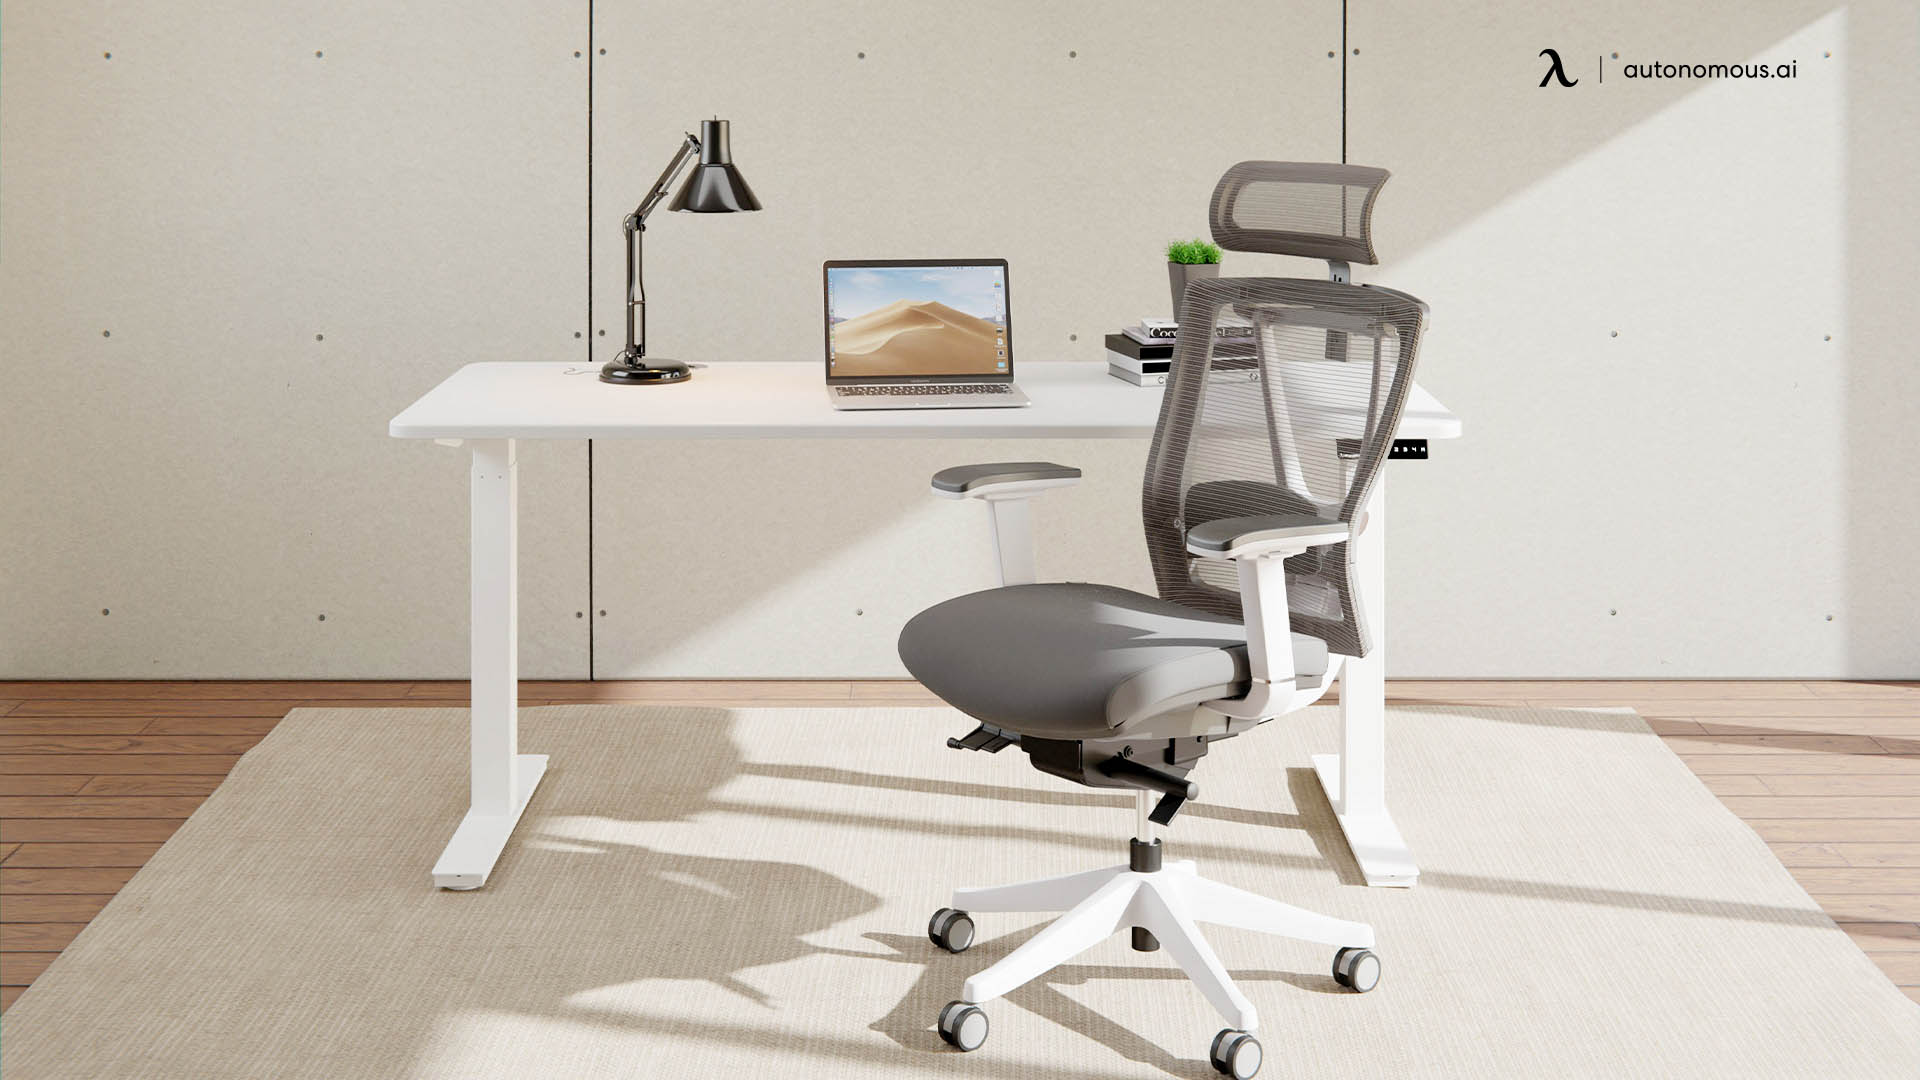 Floor with computer chair with wheels